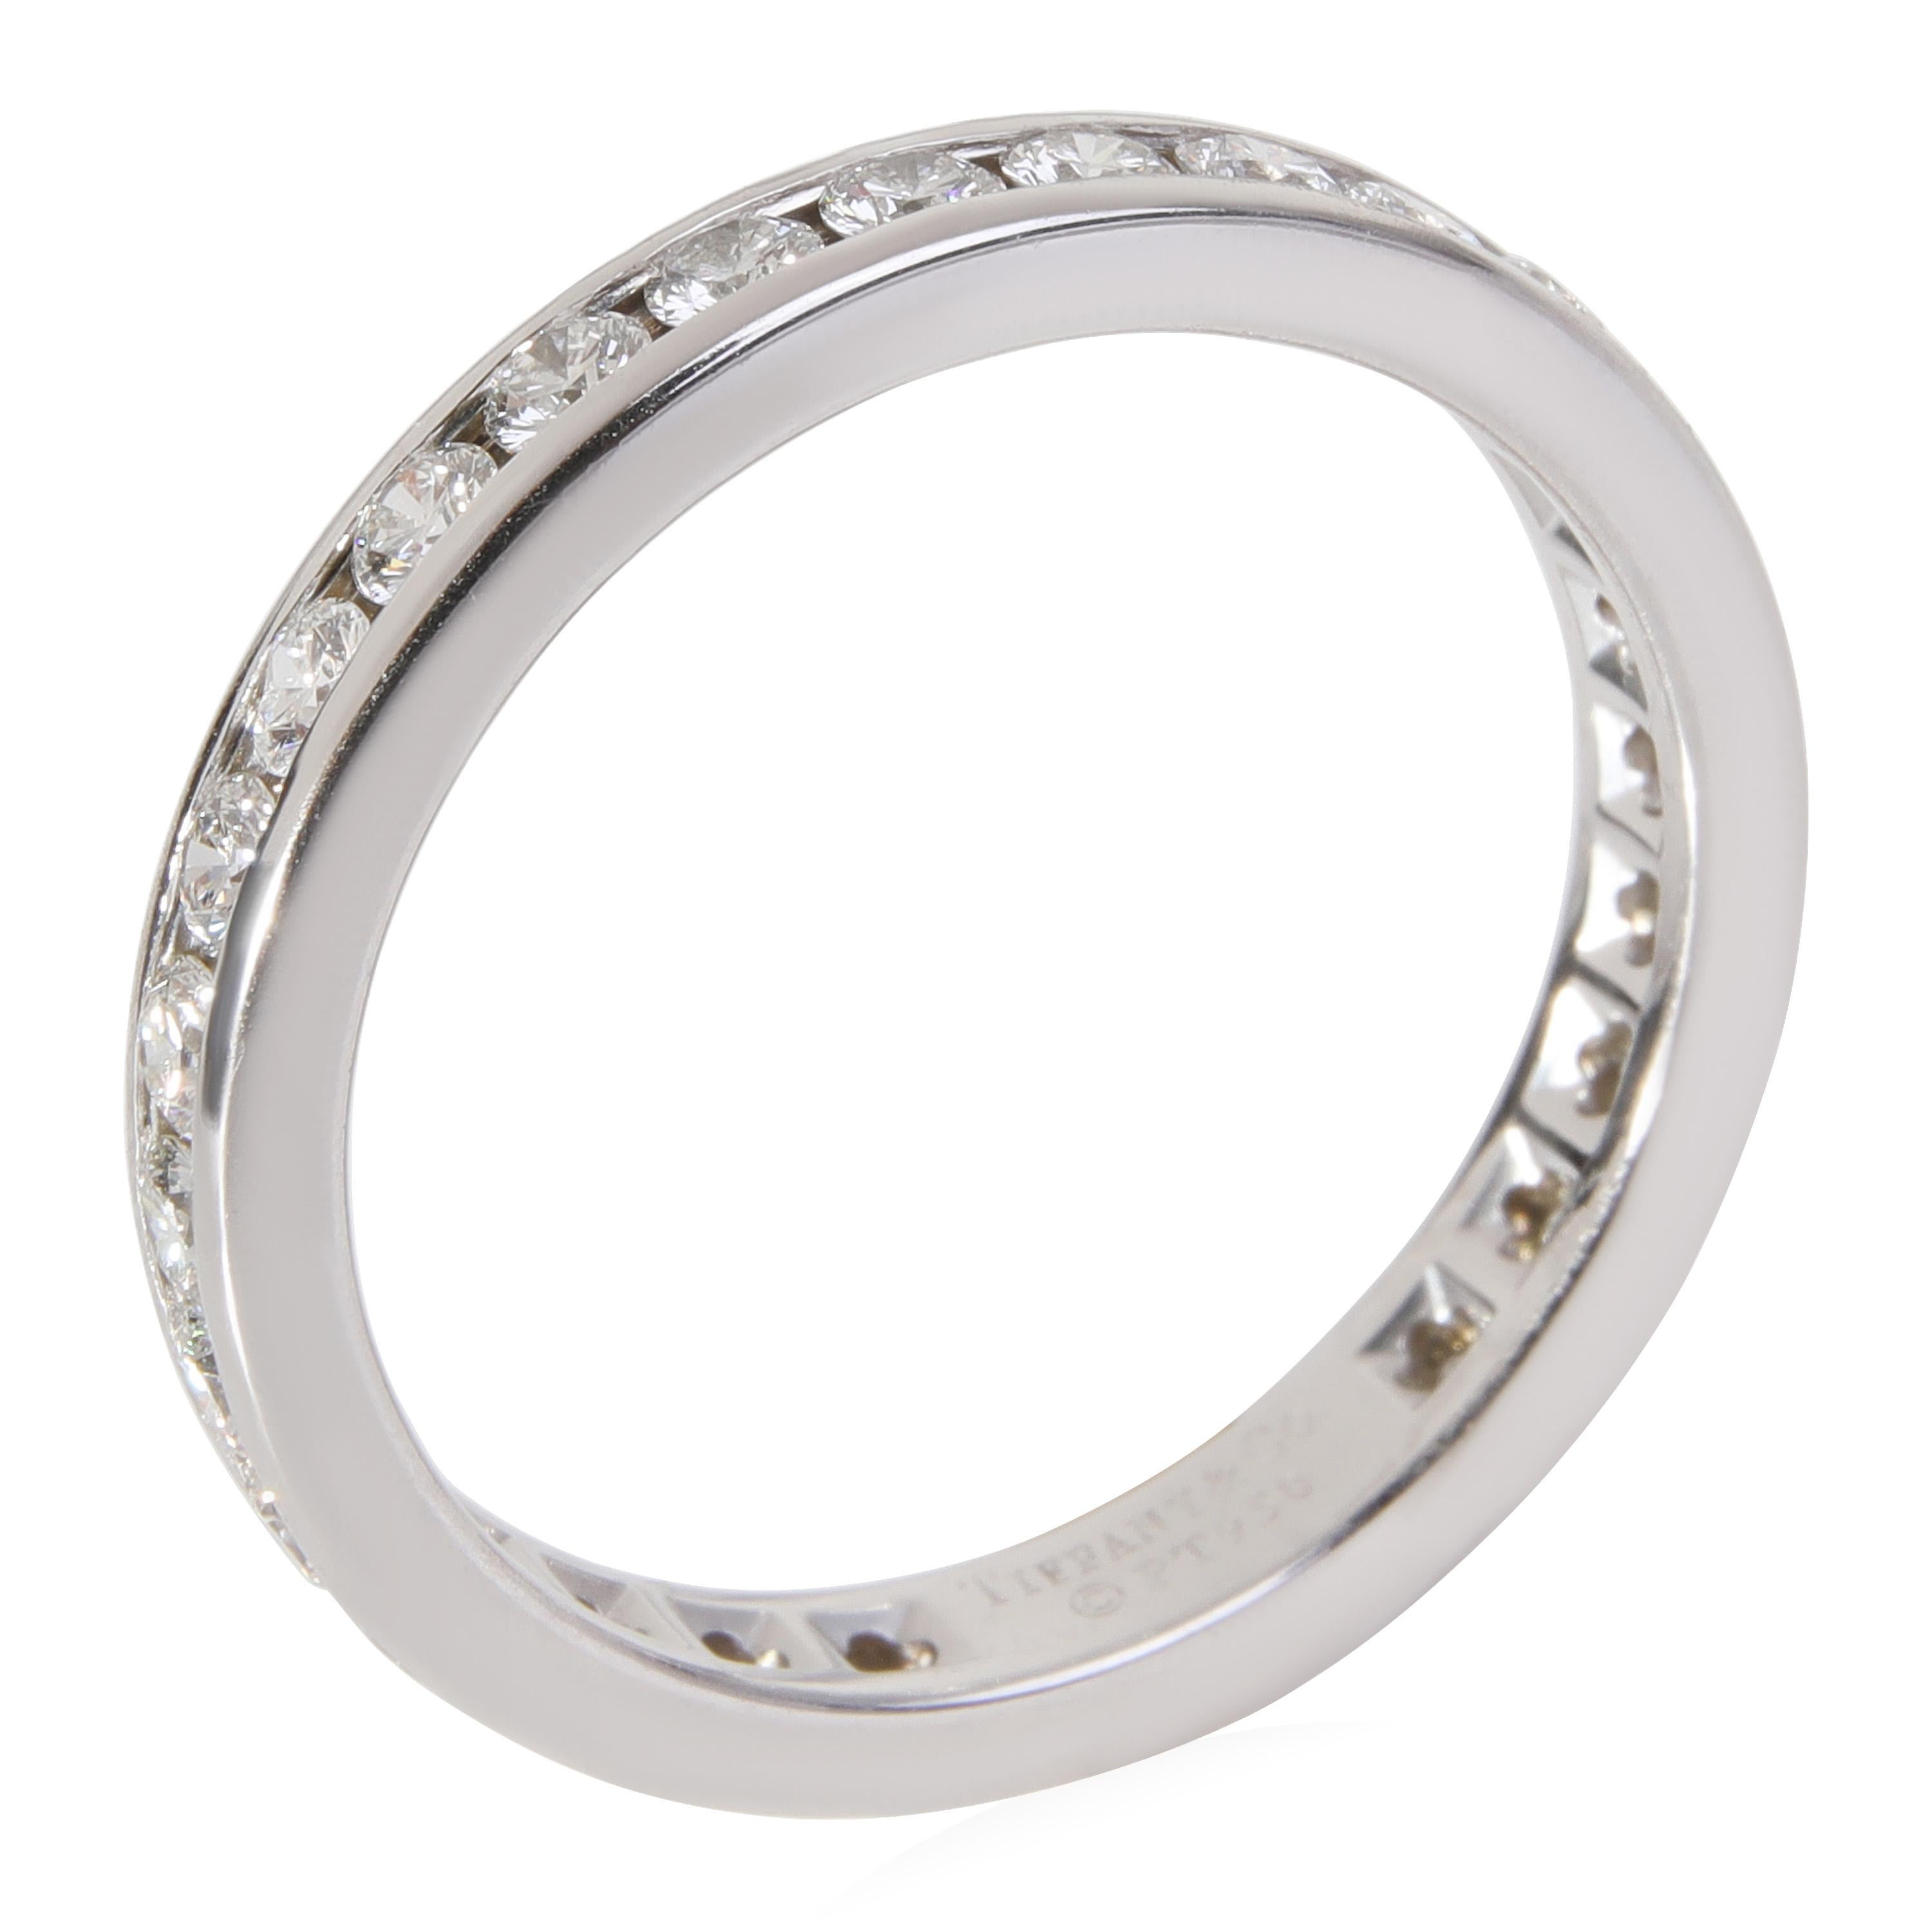 Tiffany & Co. Diamond Eternity Band in 950 Platinum 1 CTW

PRIMARY DETAILS
SKU: 120976
Listing Title: Tiffany & Co. Diamond Eternity Band in 950 Platinum 1 CTW
Condition Description: Retails for 5700 USD. In excellent condition and recently